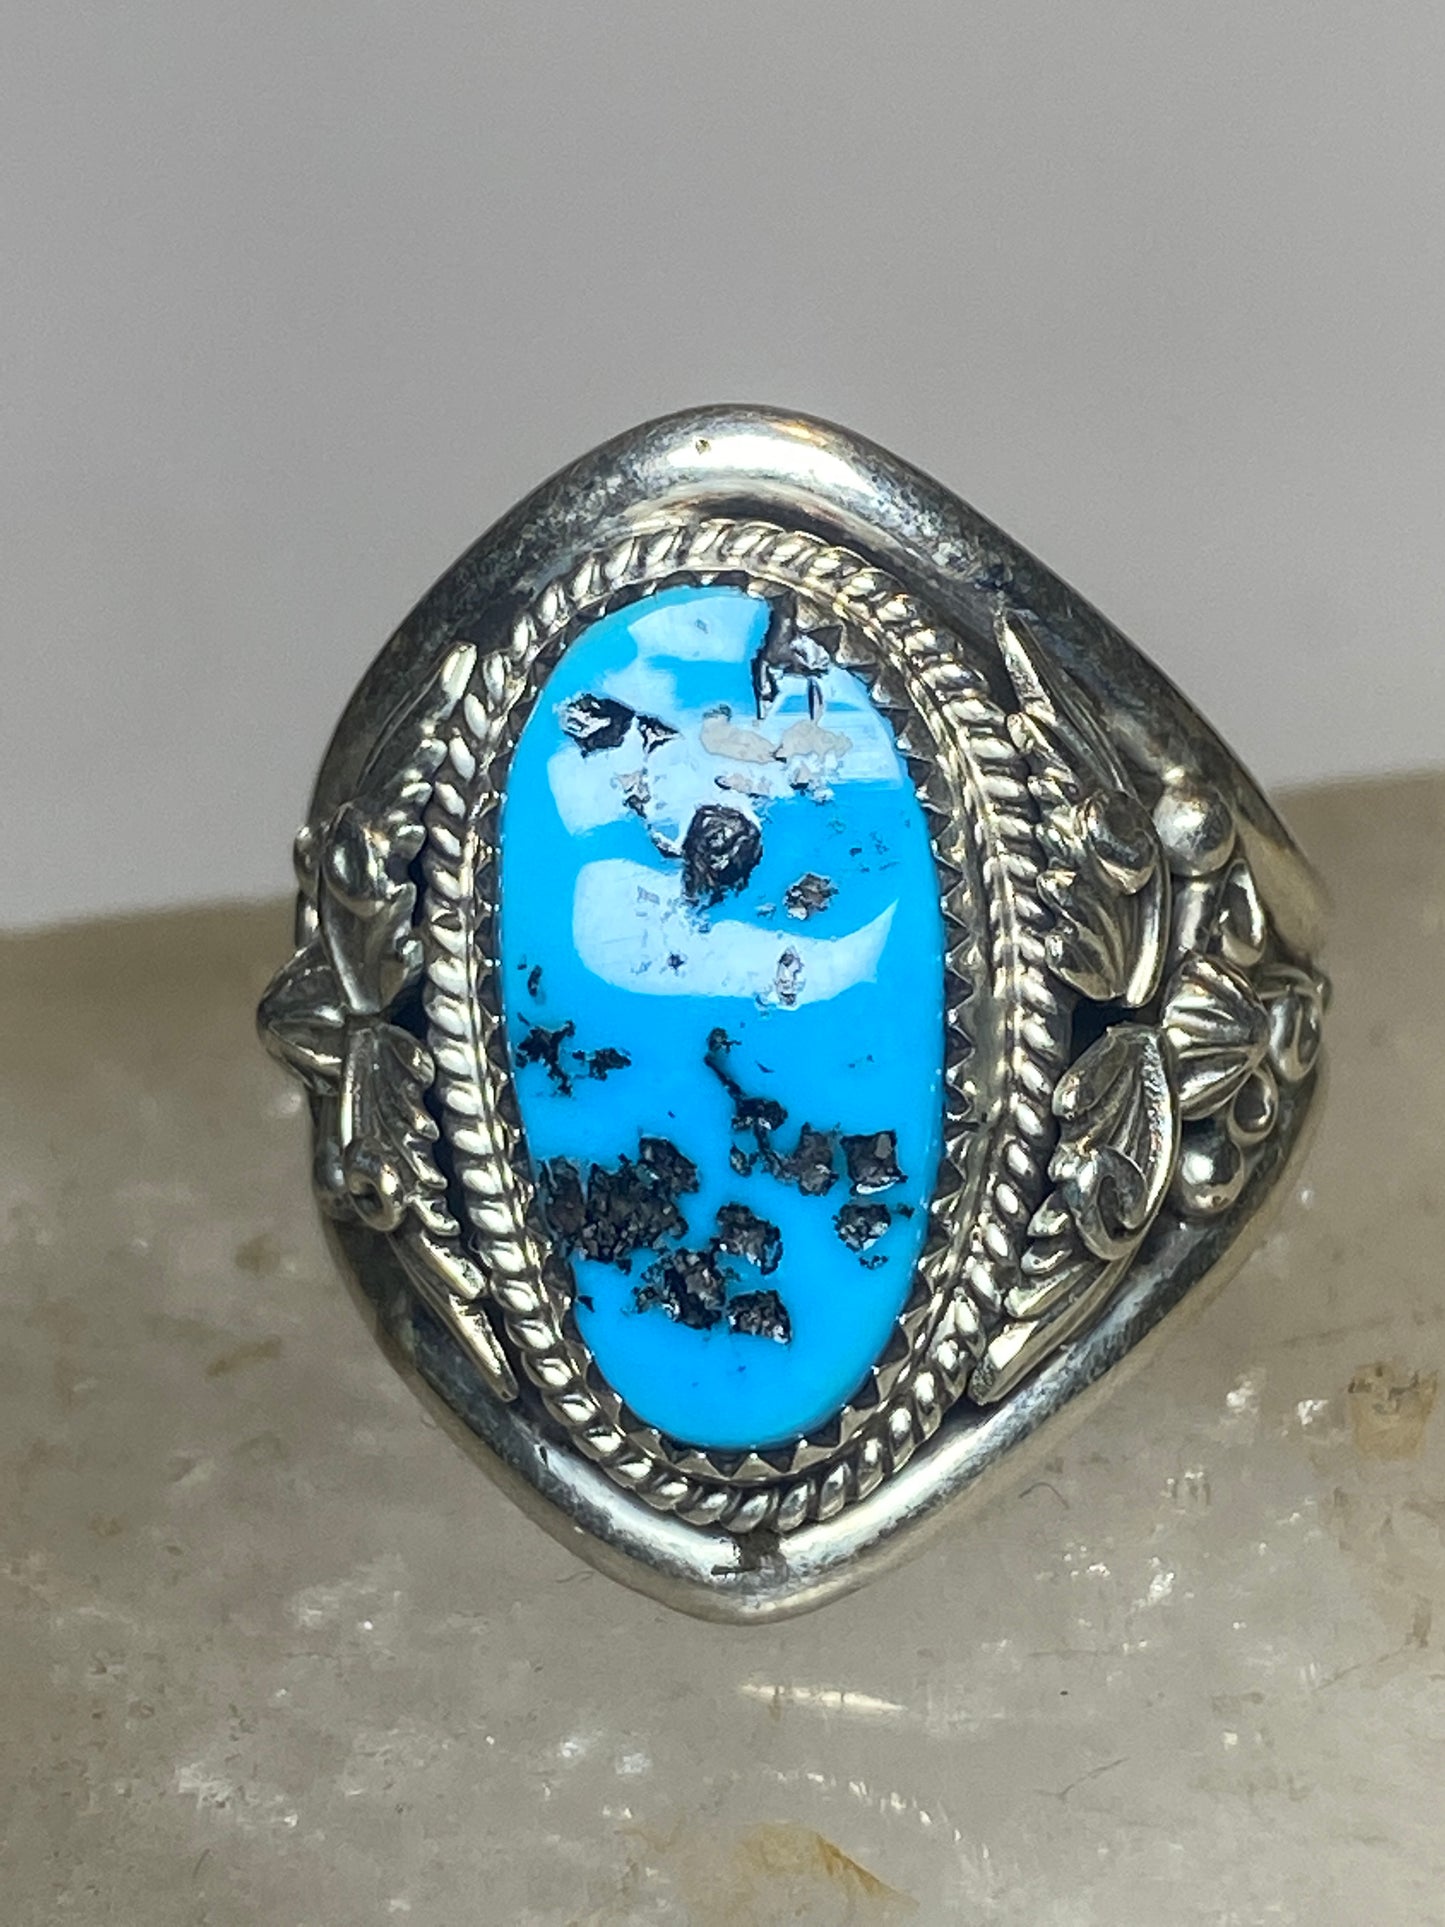 Turquoise ring size 11.75 southwest Navajo sterling silver men